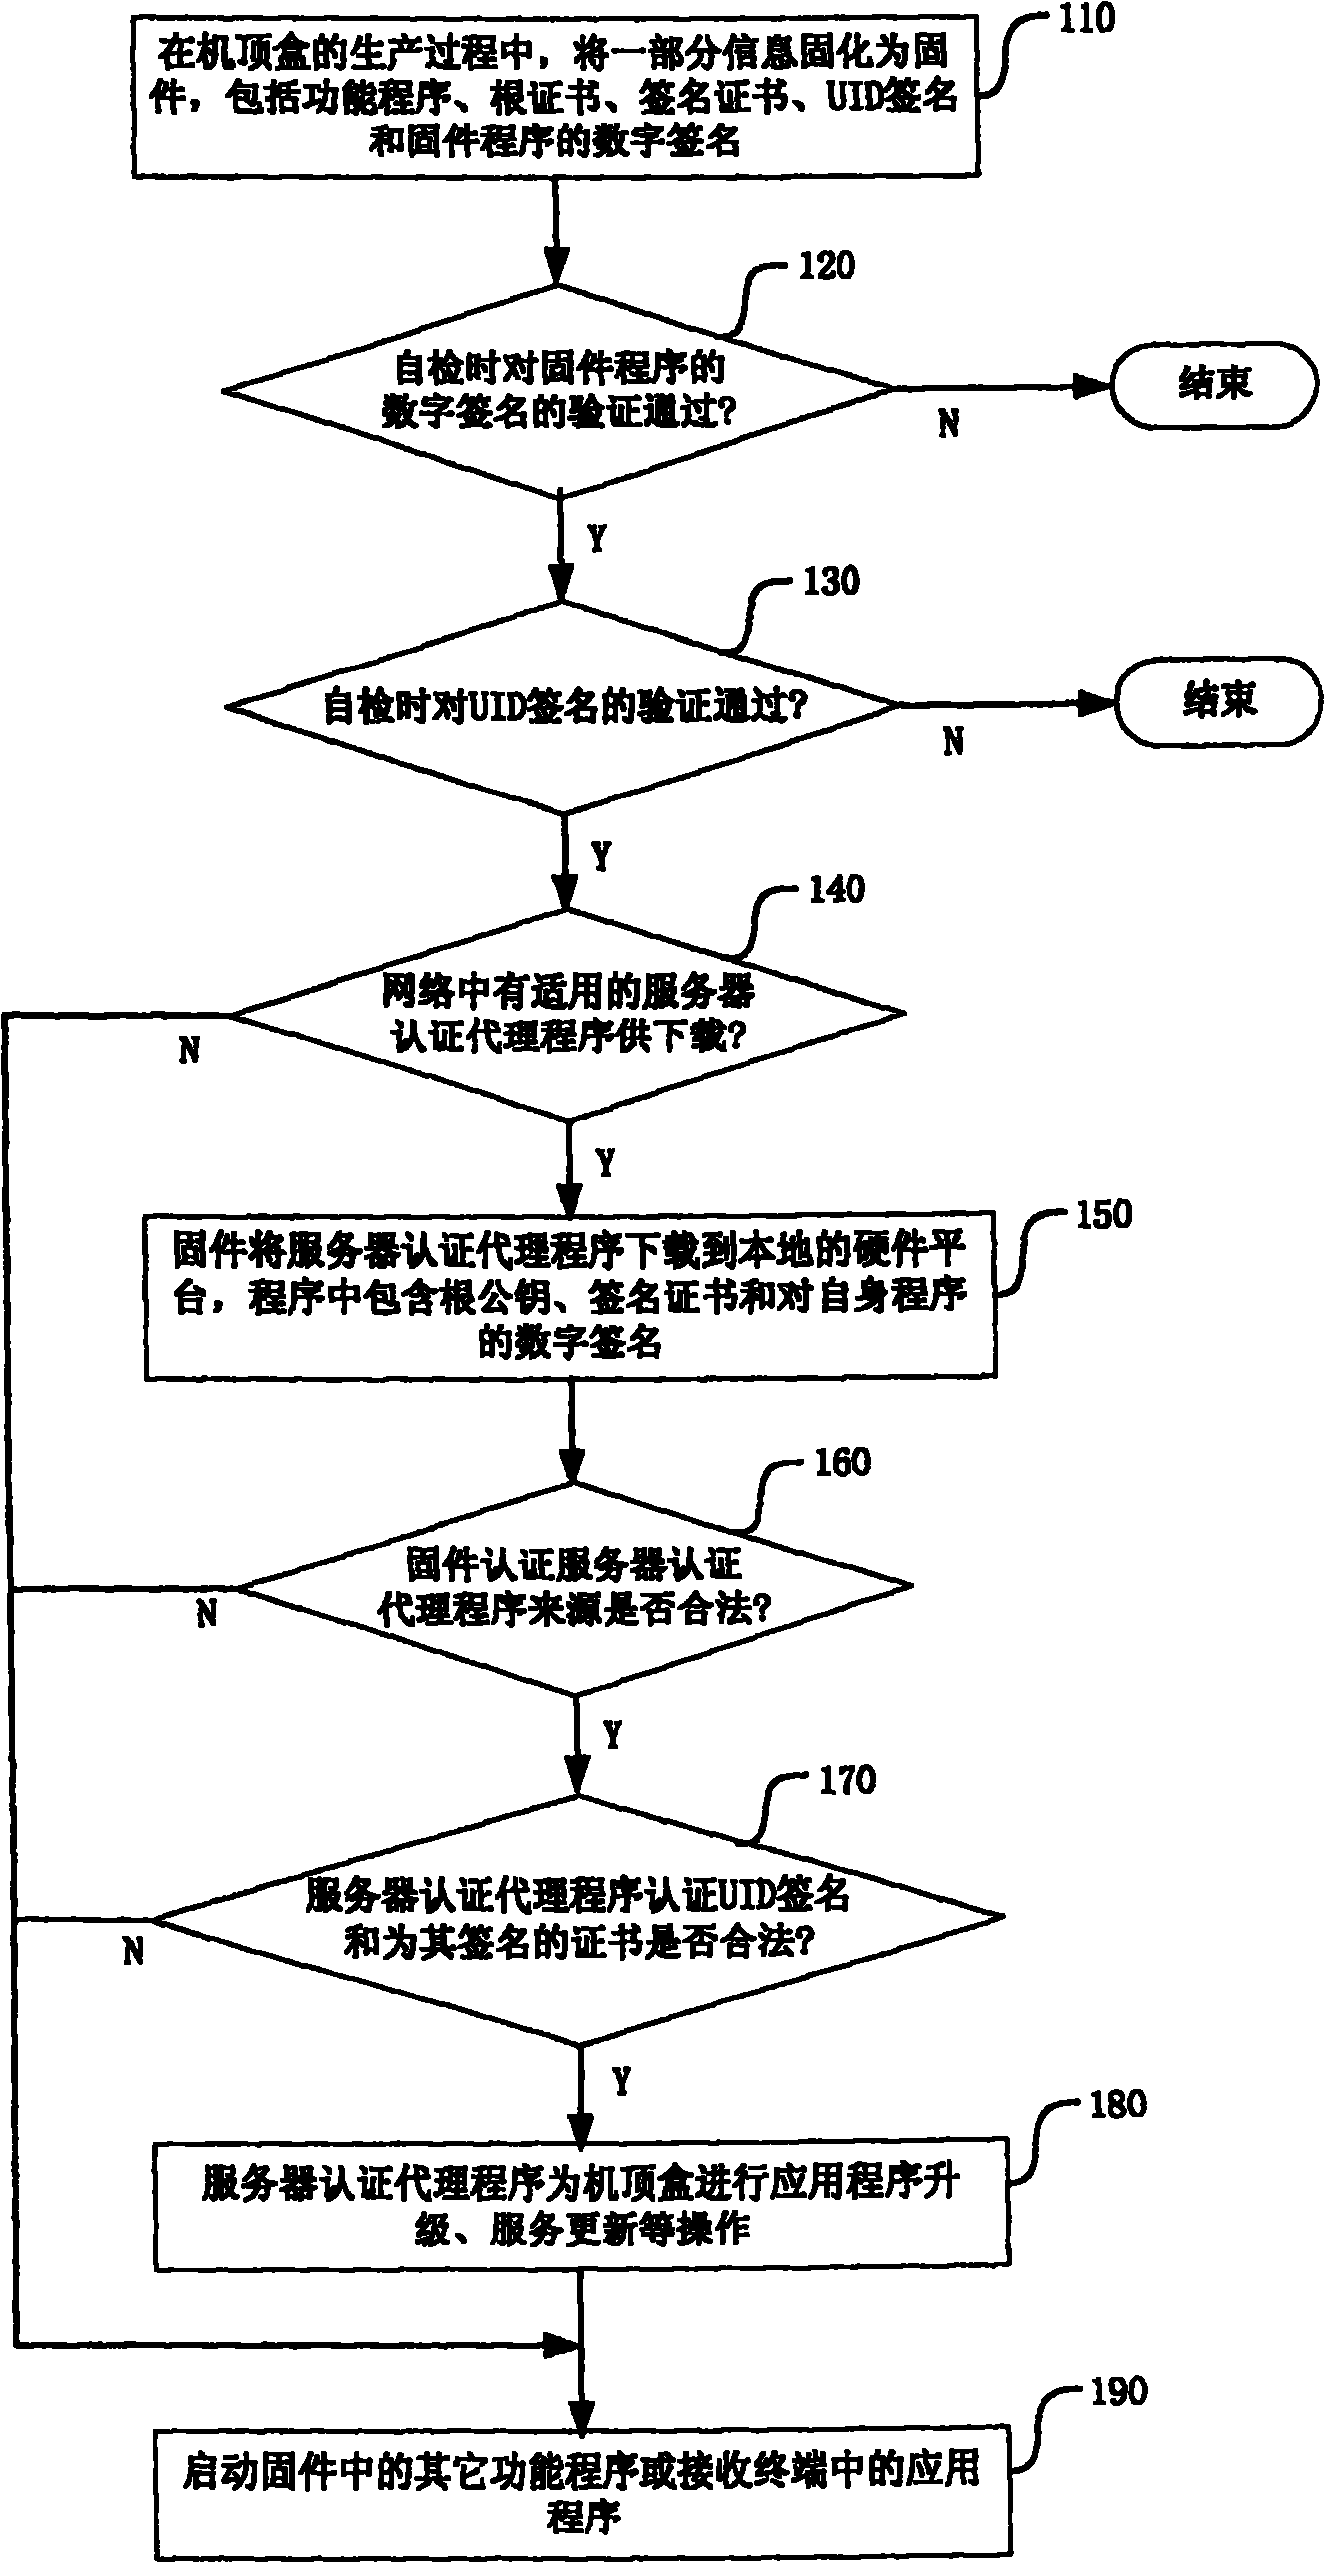 Method and system for authenticating legality of receiving terminal in unidirectional network